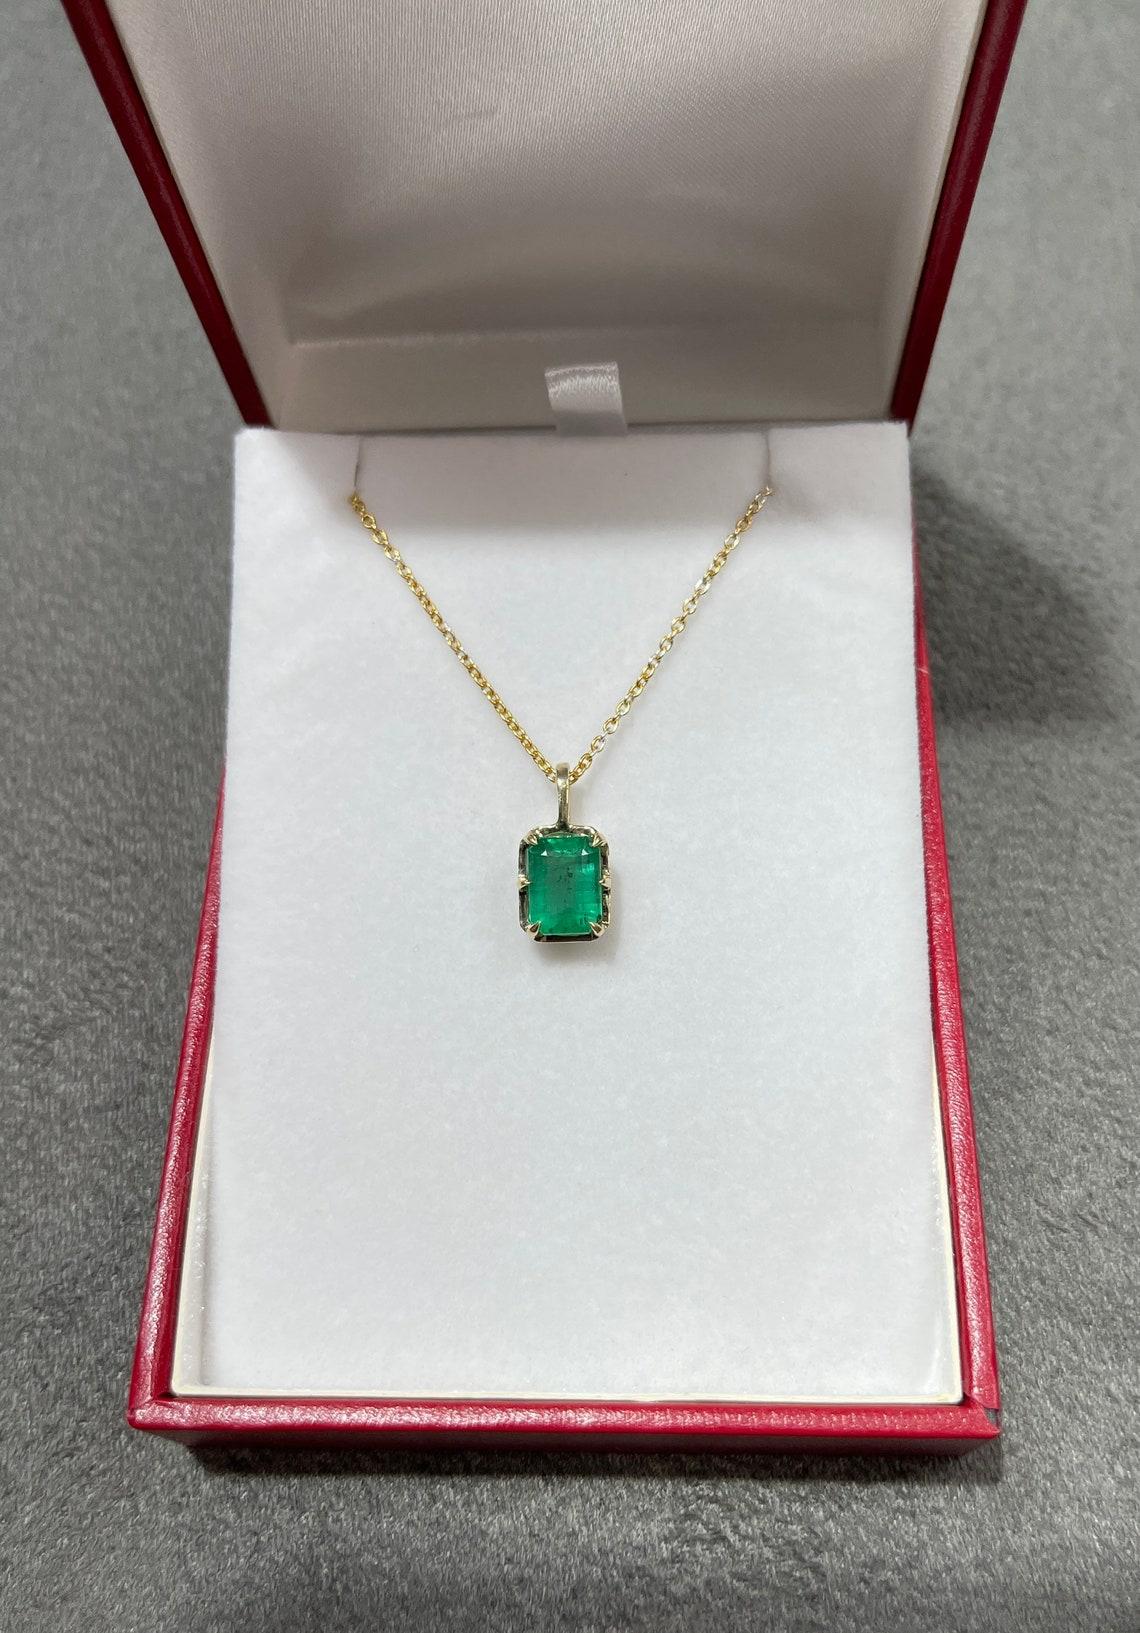 Emerald Cut 2.02ct 14K Emerald Georgian Styled 6-Prong Solitaire Pendant For Sale